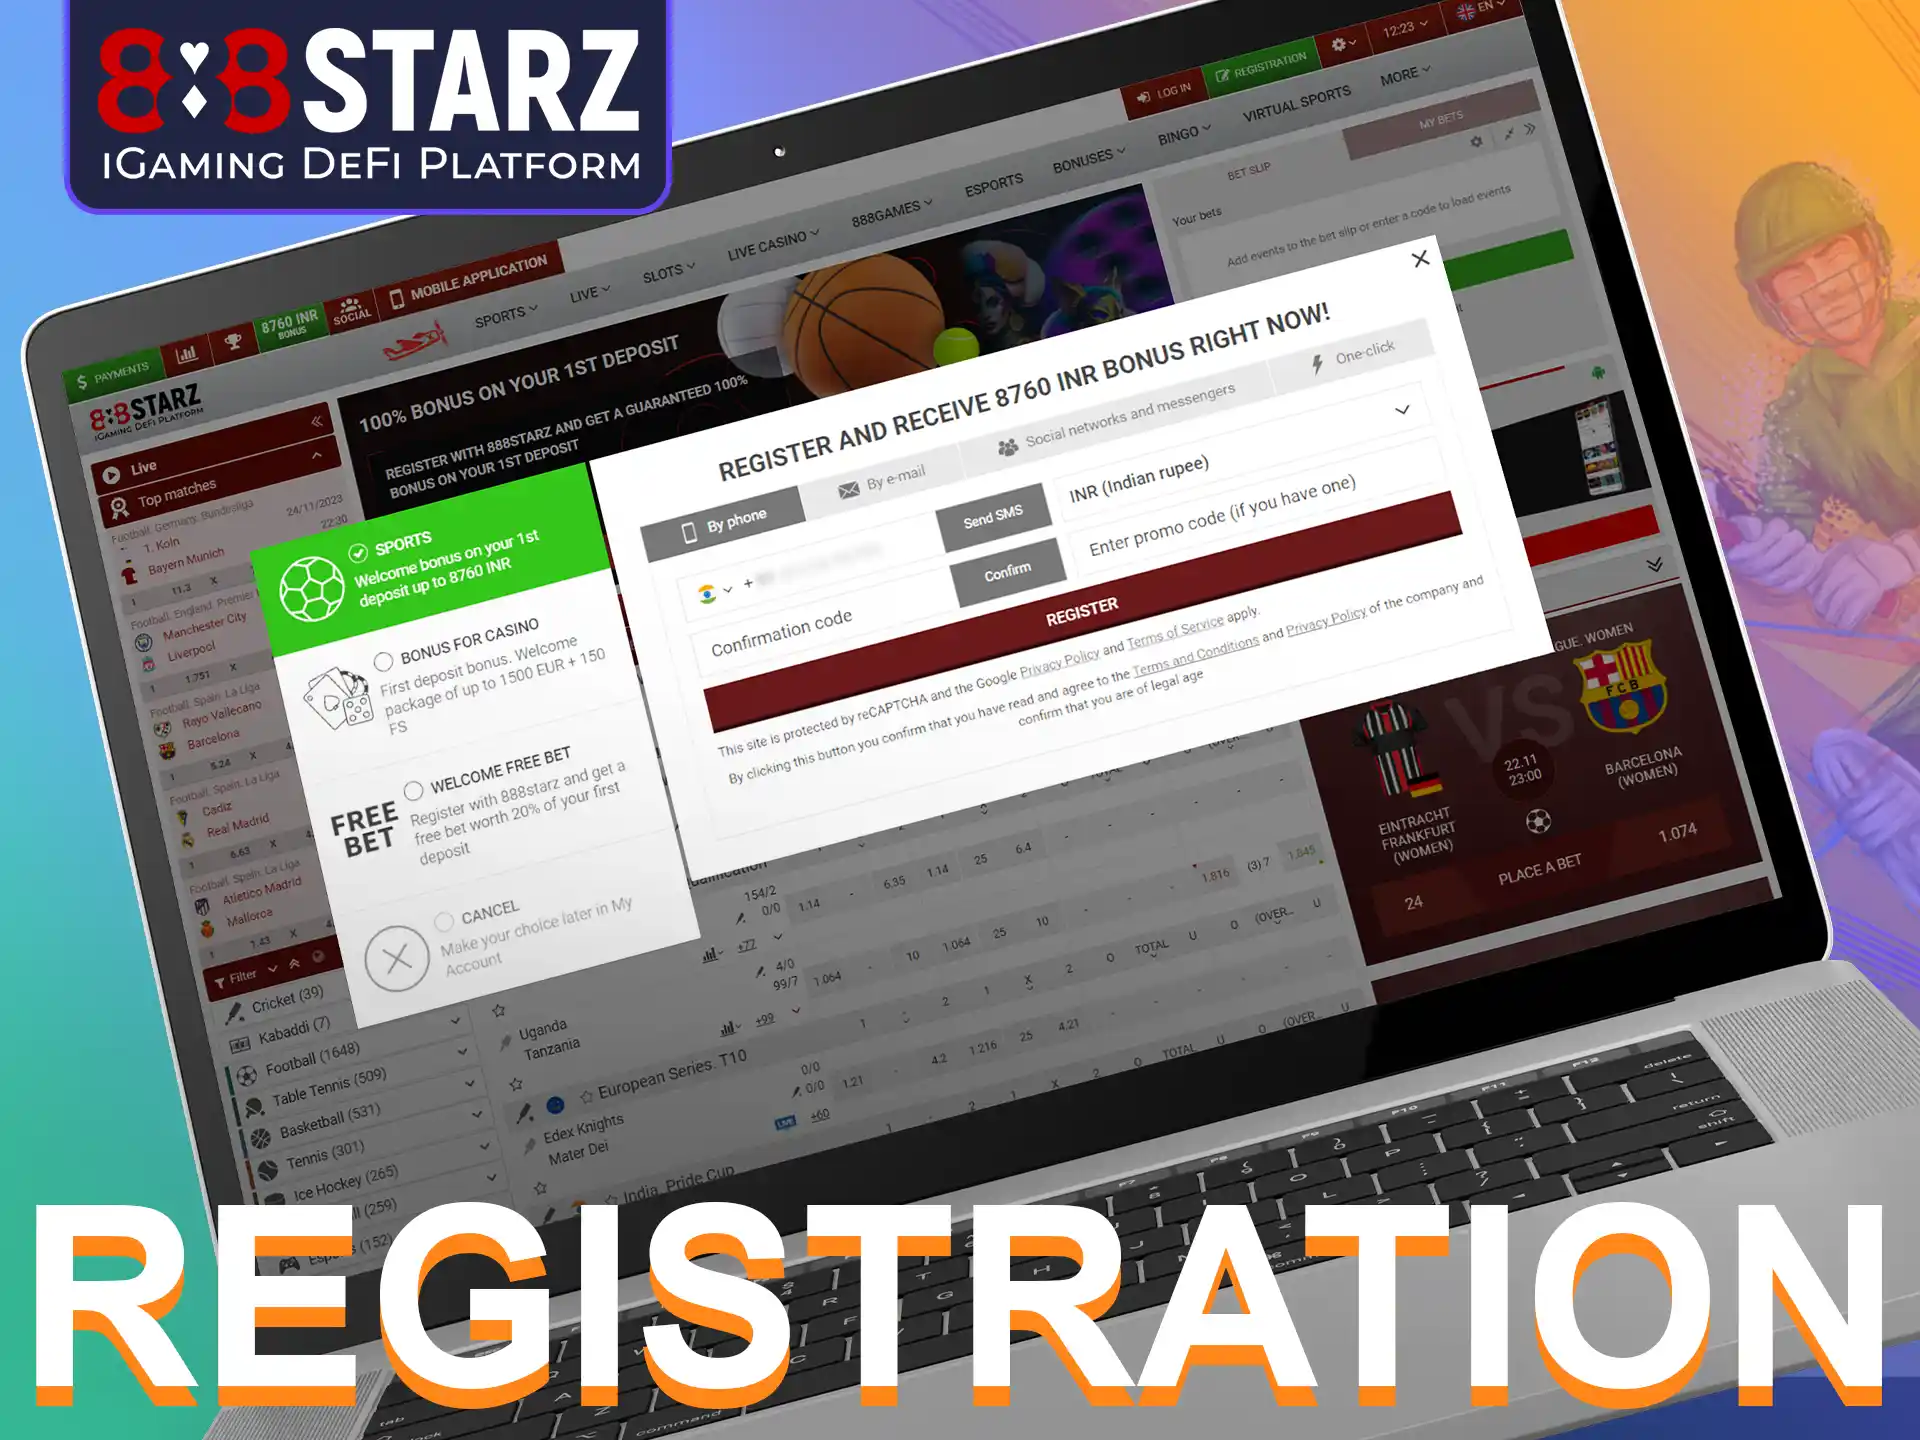 To start playing Cricket X, register at 888Starz and create your personal account.